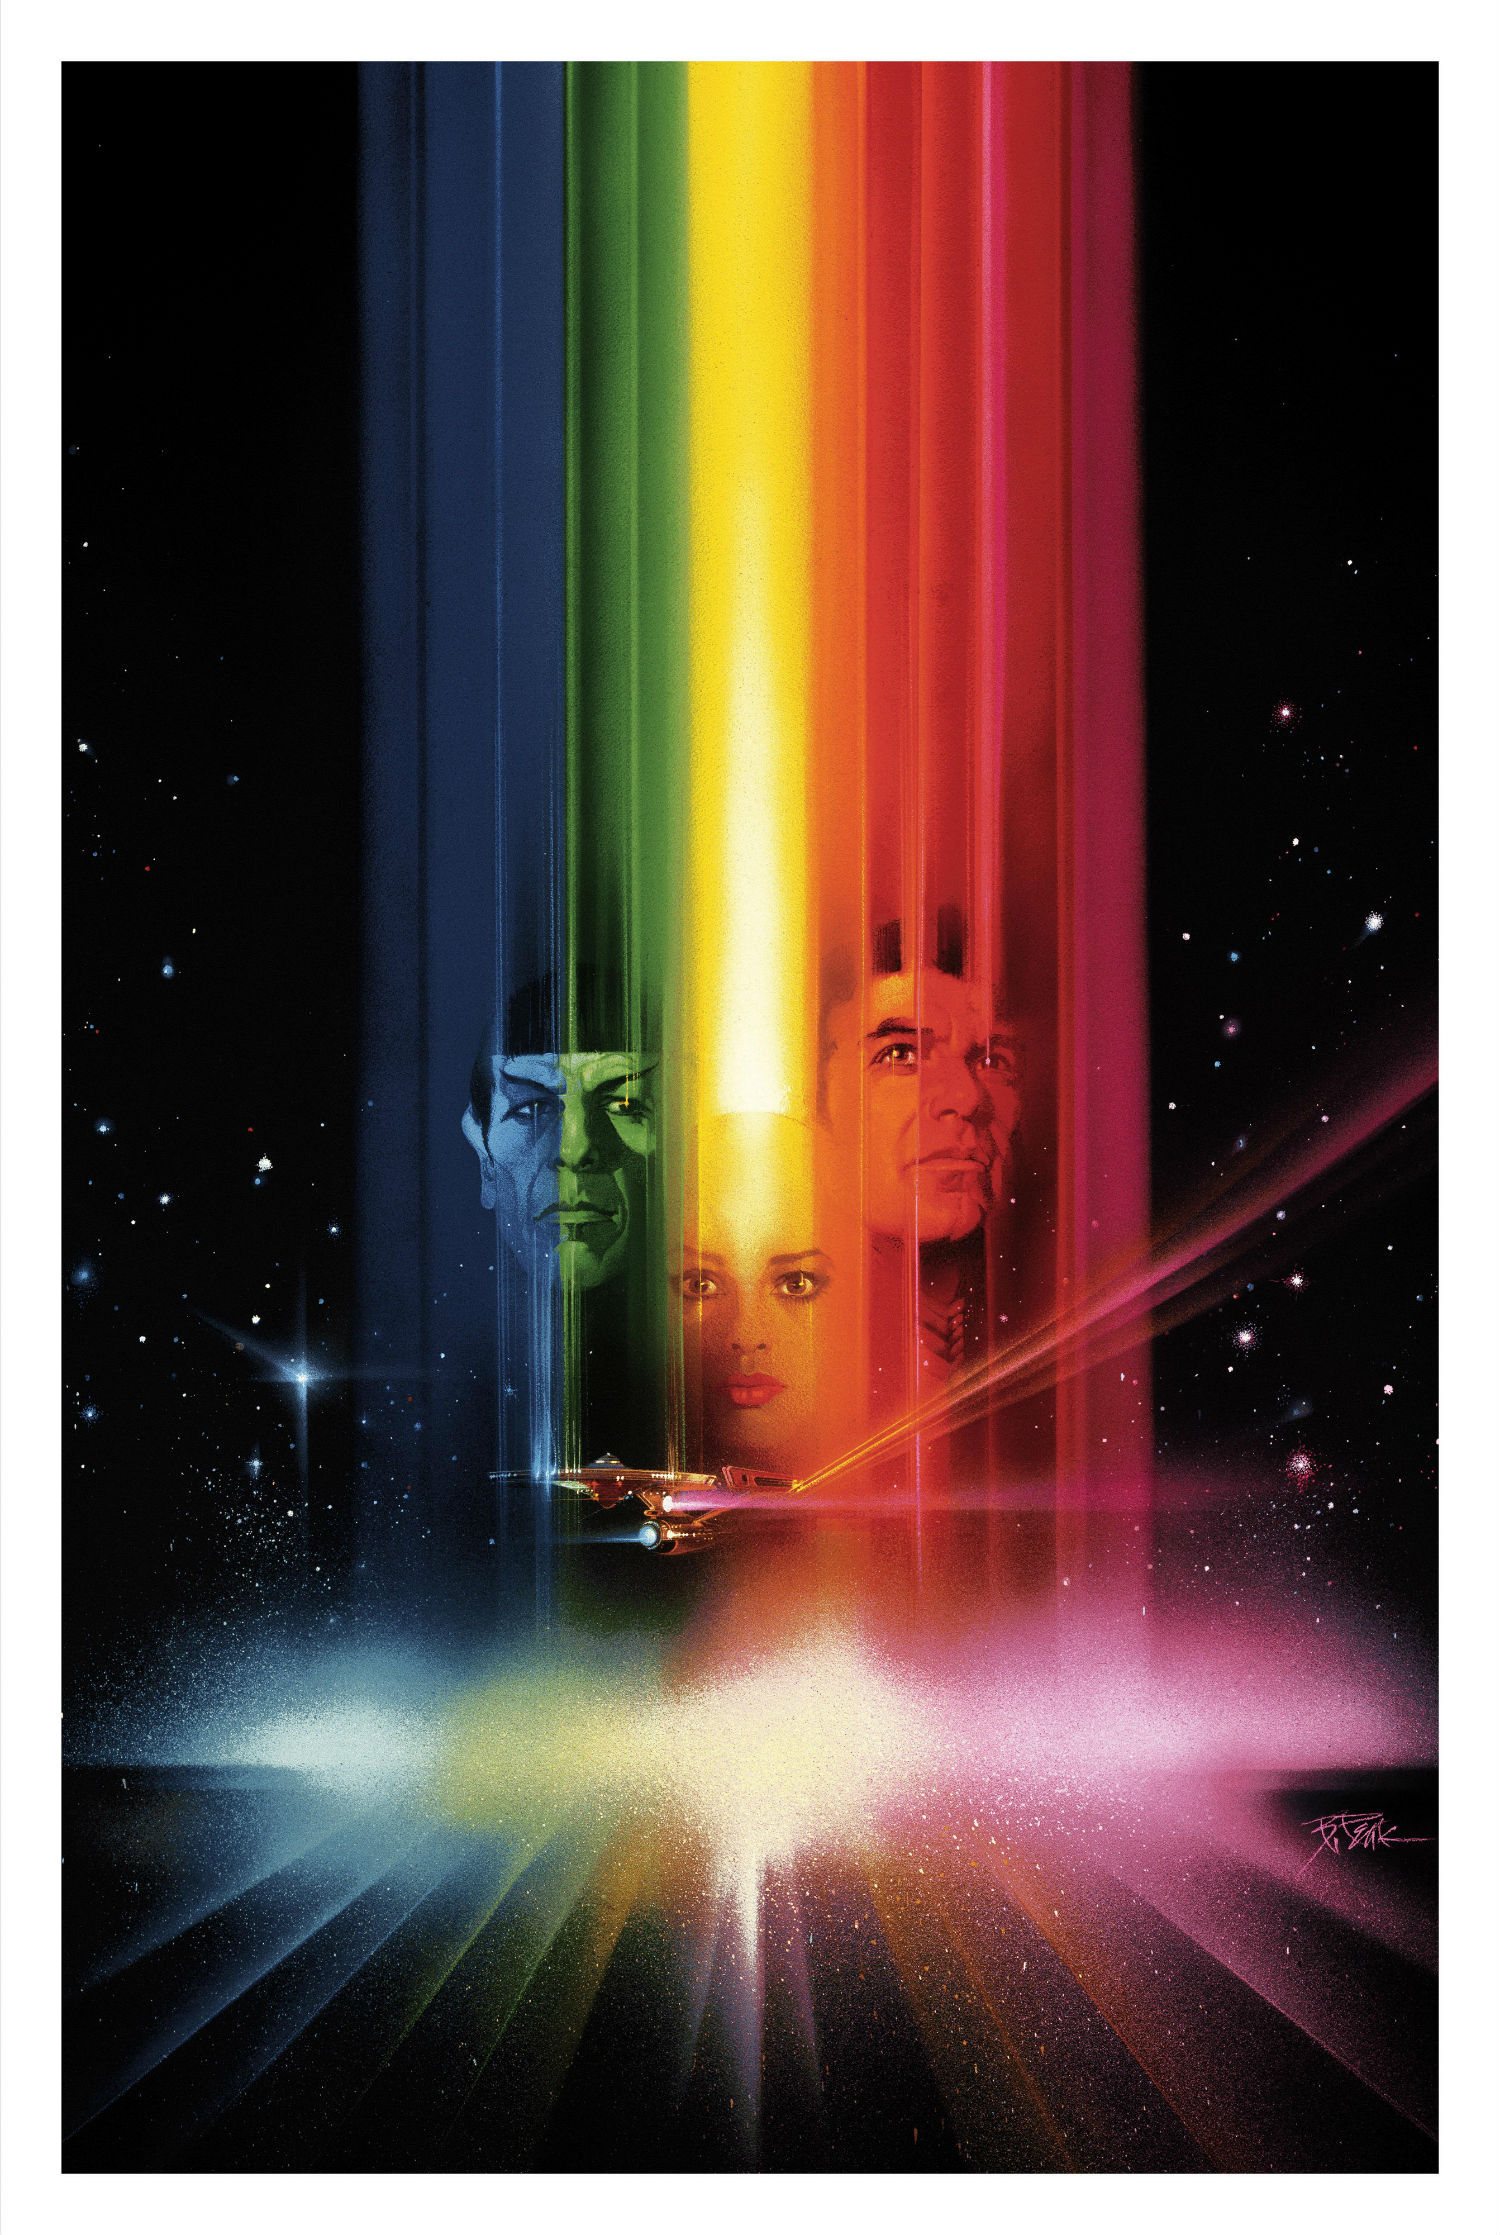 The Legendary Poster For Star Trek: The Motion Picture Is Getting A Limited Edition Release